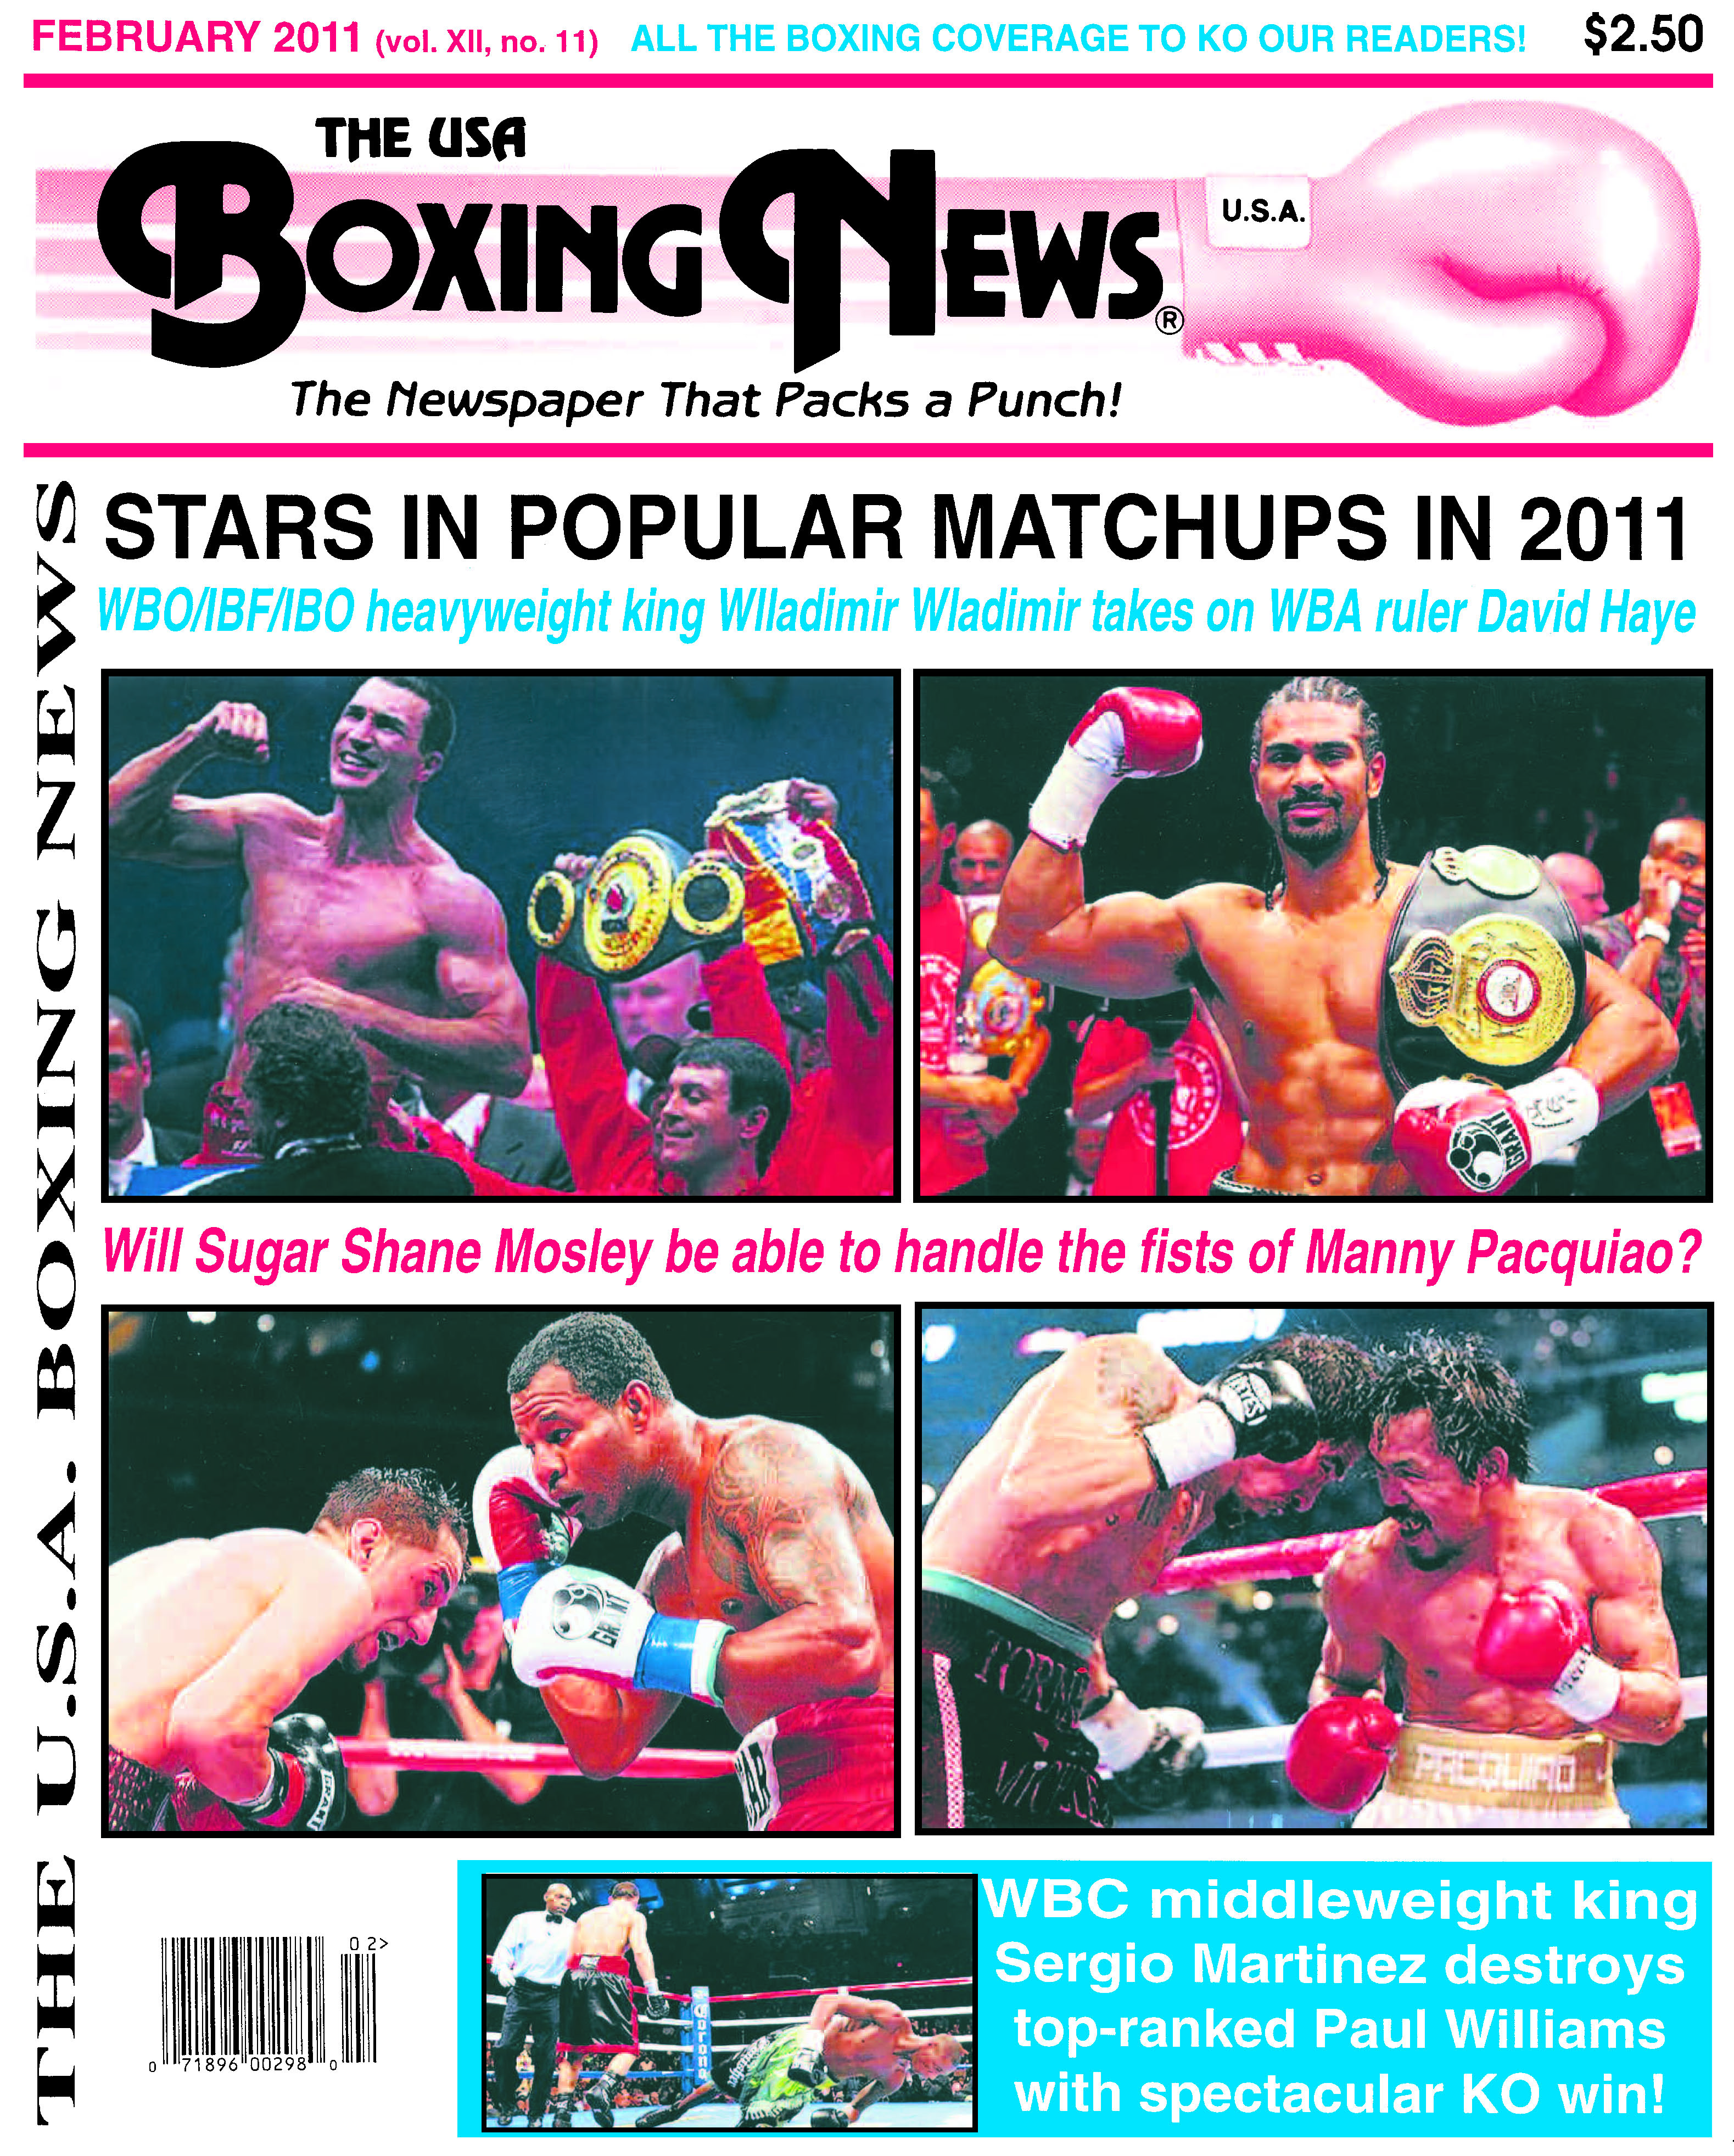 The USA BOXING NEWS Covers over the years THE USA BOXING NEWS